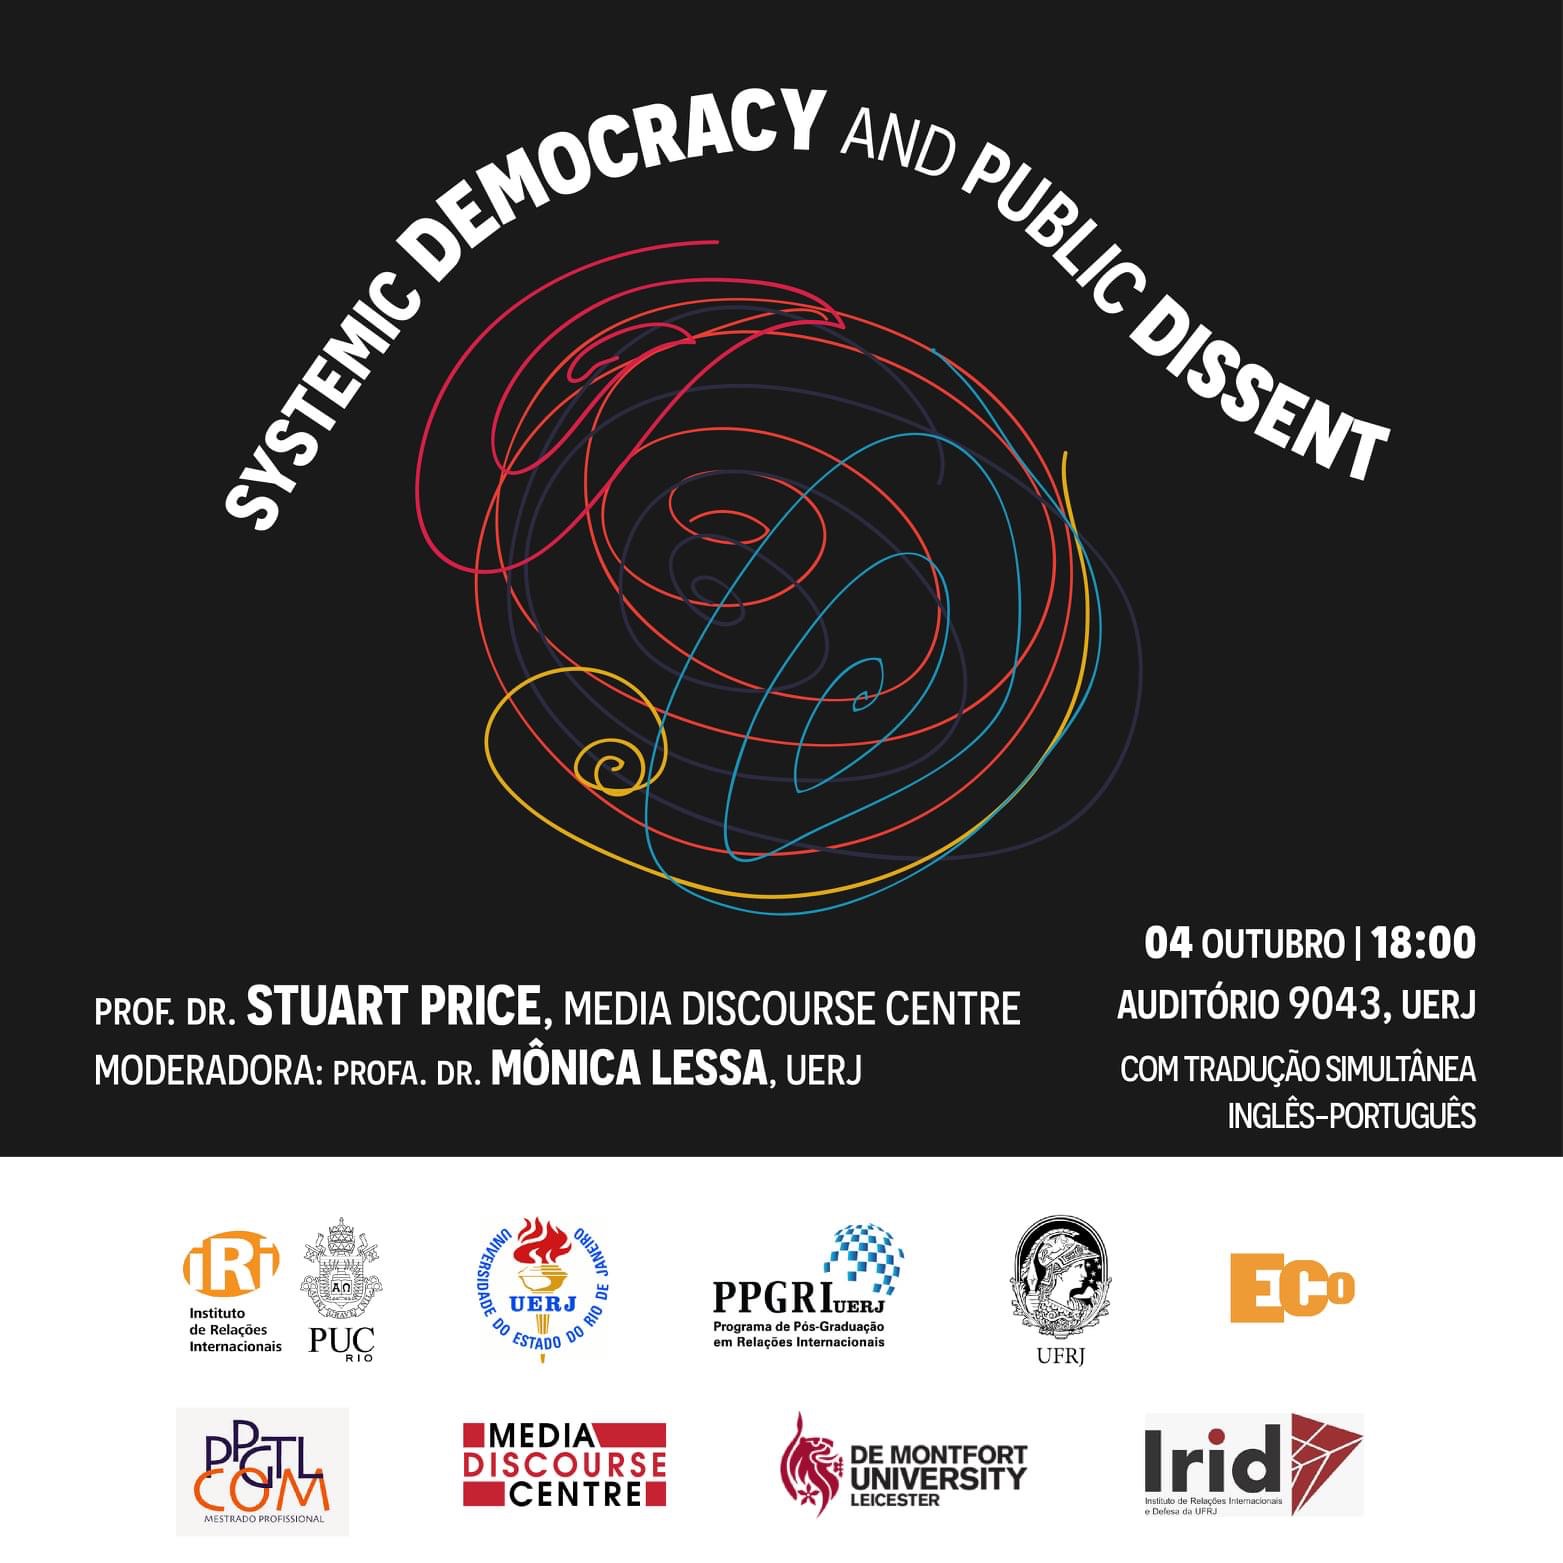 “Systemic Democracy and Public Dissent”, Prof.Dr. Stuart Price